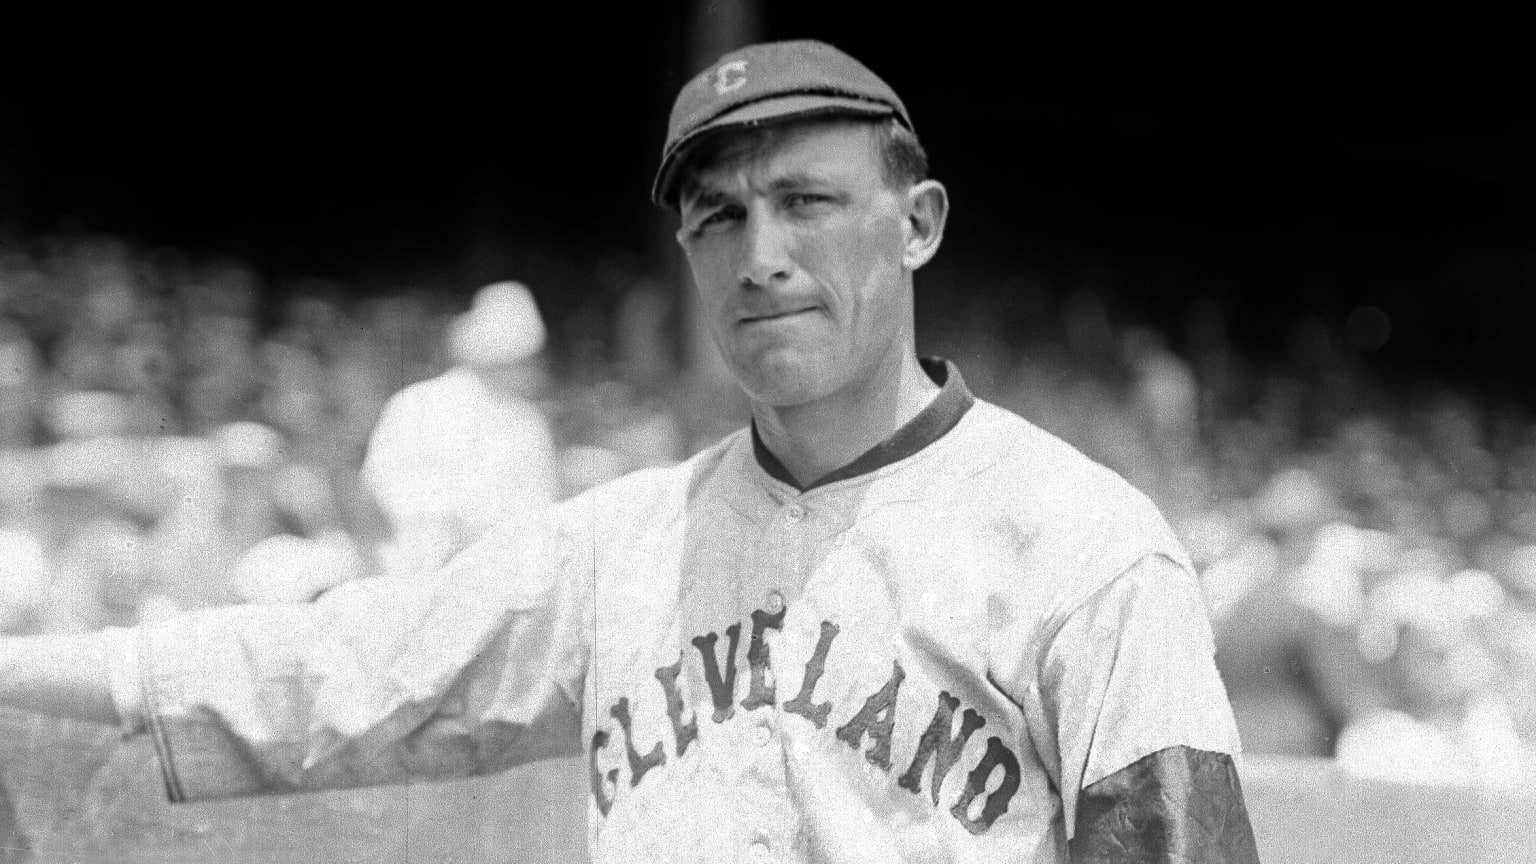 Early 20th century Cleveland infielder Bill Wambsganss is pictured